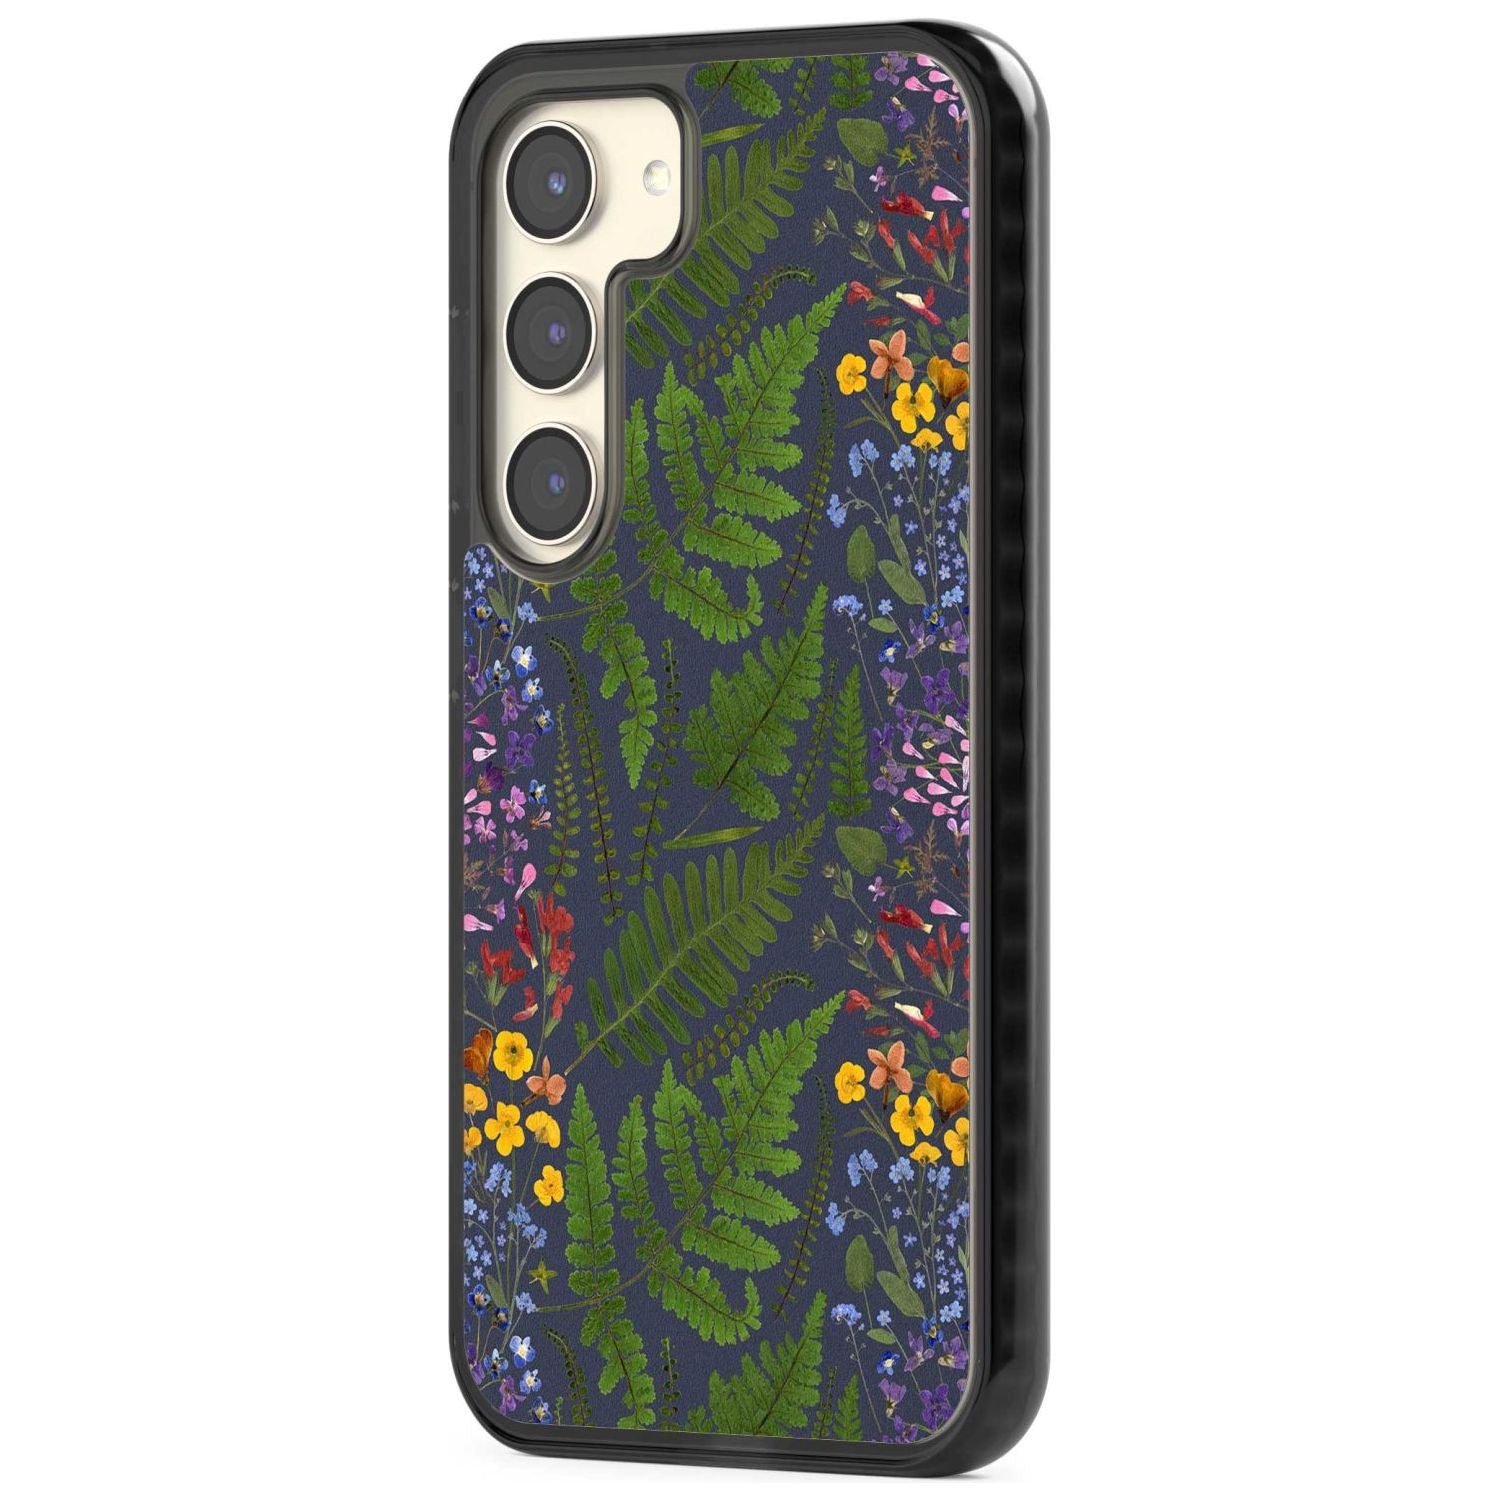 Busy Floral and Fern Design - Navy Phone Case iPhone 15 Pro Max / Black Impact Case,iPhone 15 Plus / Black Impact Case,iPhone 15 Pro / Black Impact Case,iPhone 15 / Black Impact Case,iPhone 15 Pro Max / Impact Case,iPhone 15 Plus / Impact Case,iPhone 15 Pro / Impact Case,iPhone 15 / Impact Case,iPhone 15 Pro Max / Magsafe Black Impact Case,iPhone 15 Plus / Magsafe Black Impact Case,iPhone 15 Pro / Magsafe Black Impact Case,iPhone 15 / Magsafe Black Impact Case,iPhone 14 Pro Max / Black Impact Case,iPhone 14